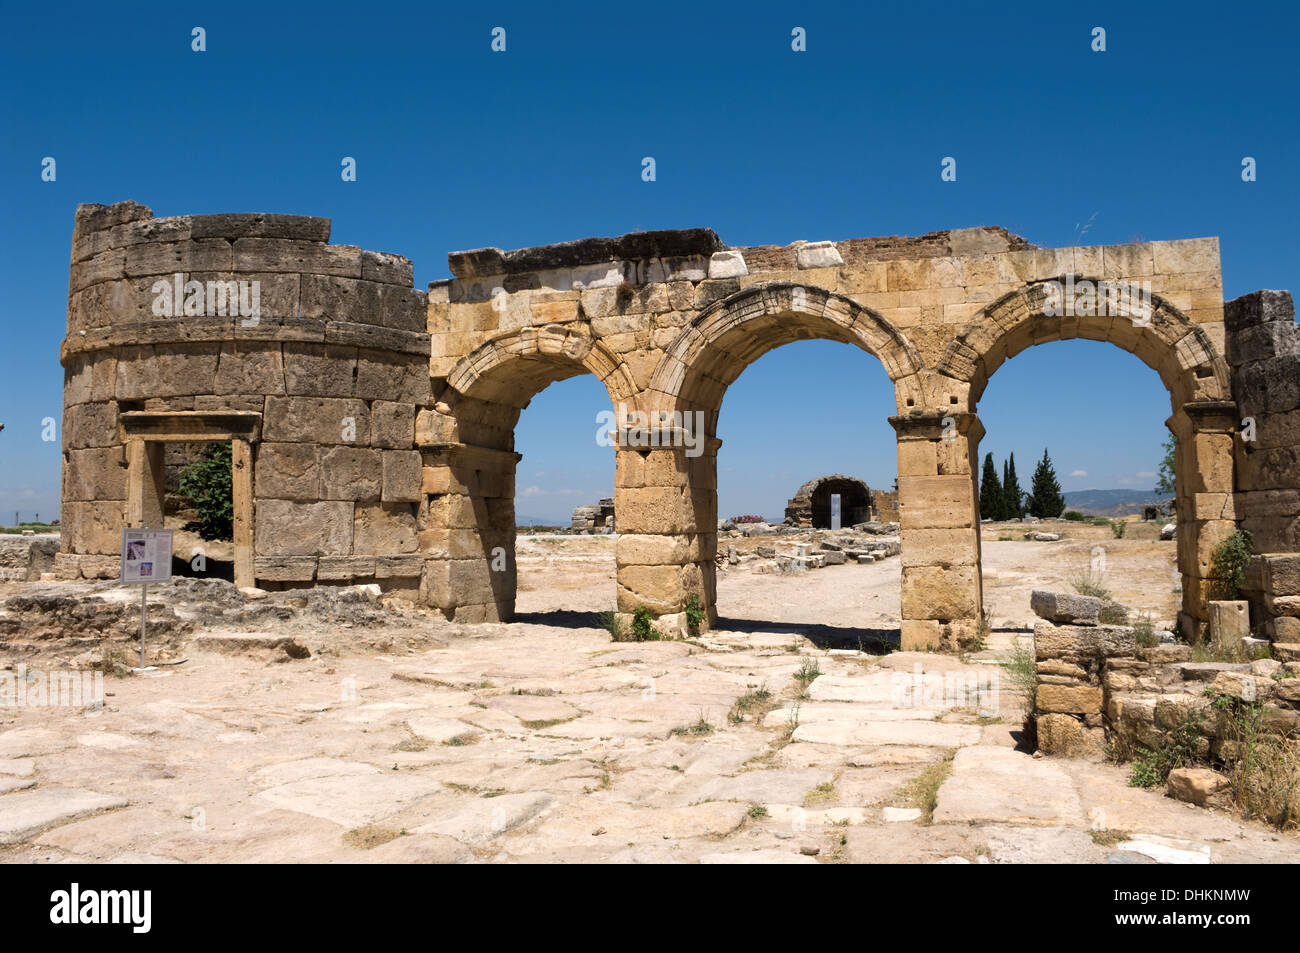 Frontinus (Domitian) Gate at the ancient Greek and Roman city of Hierapolis (Taurus mountains, Pamukkale in Turkey) Stock Photo